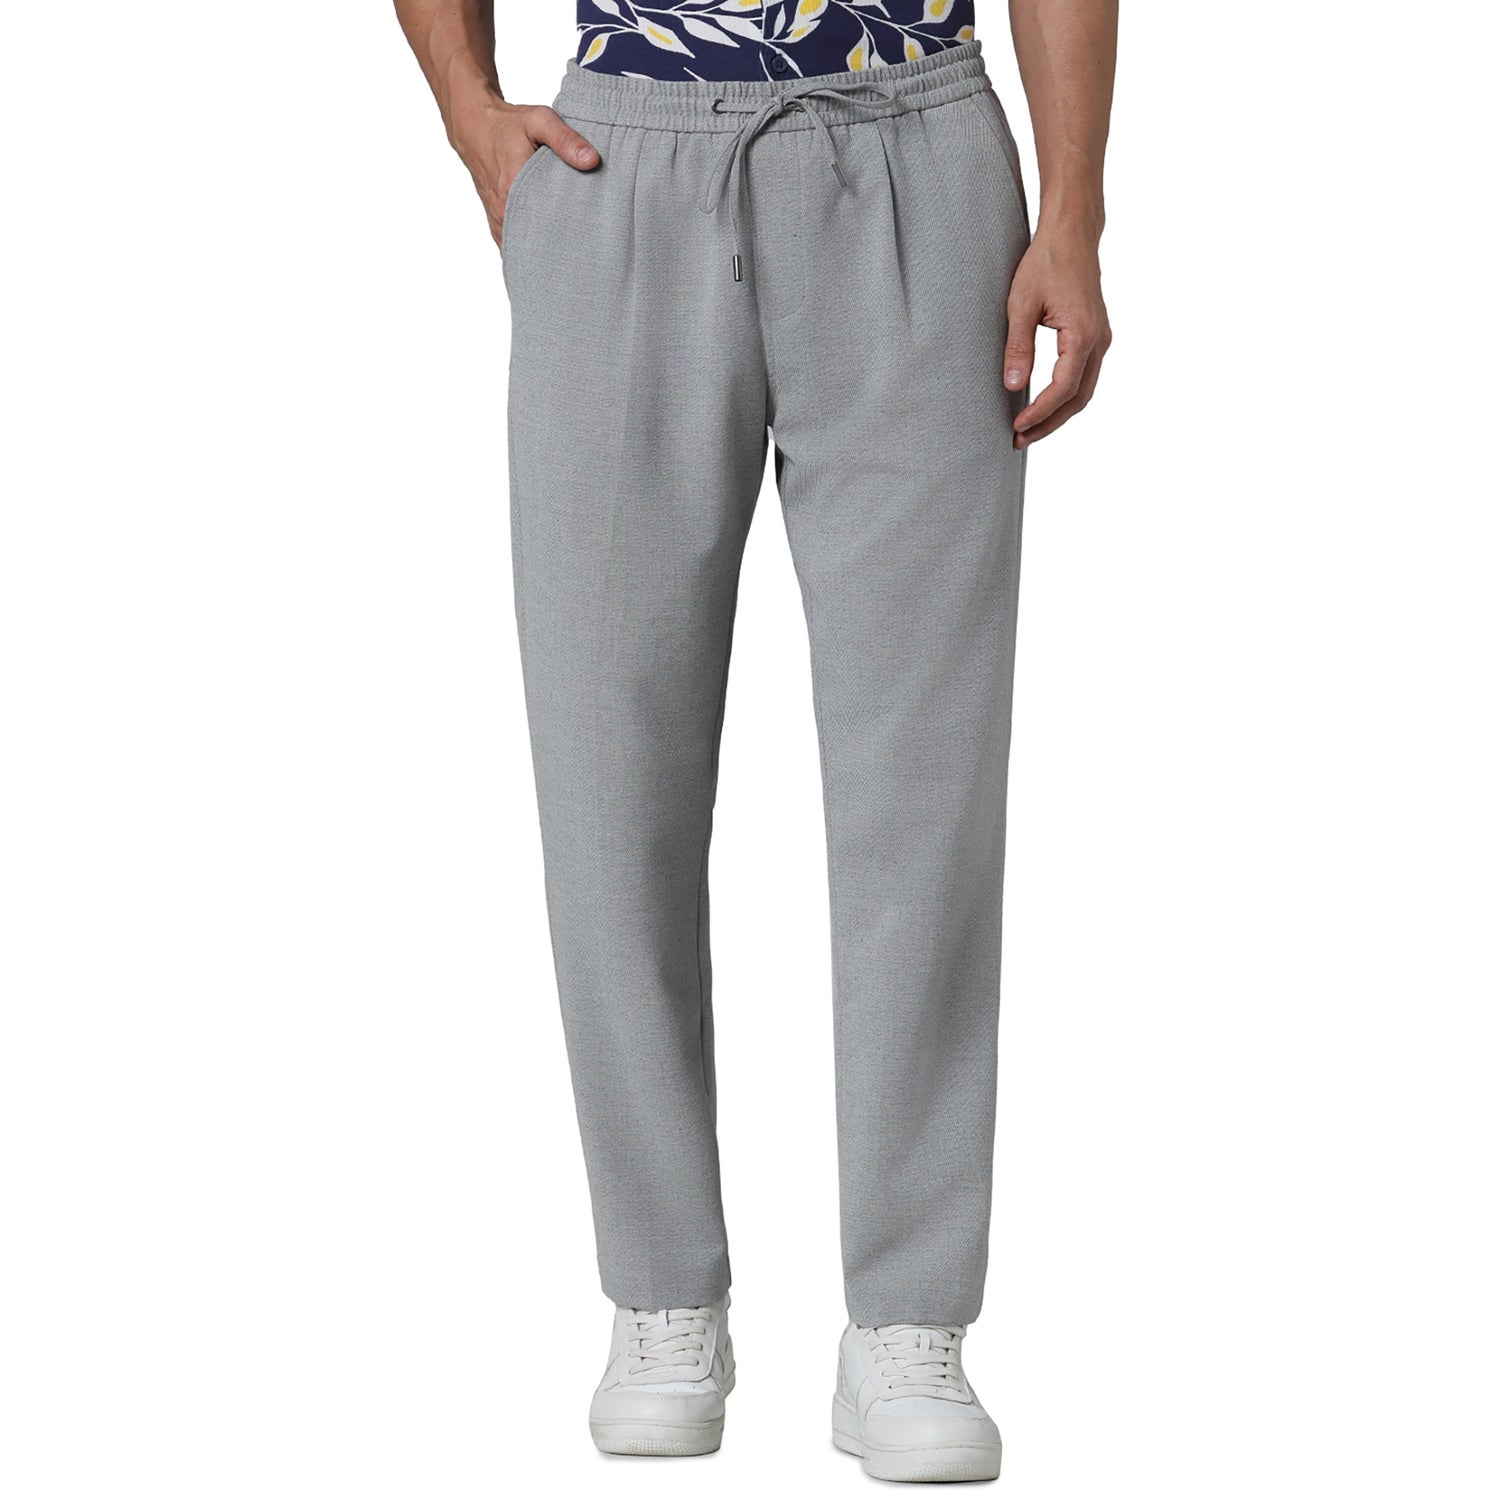 Men Grey Solid Regular Fit Polyester Casual Trousers (GOPICK)